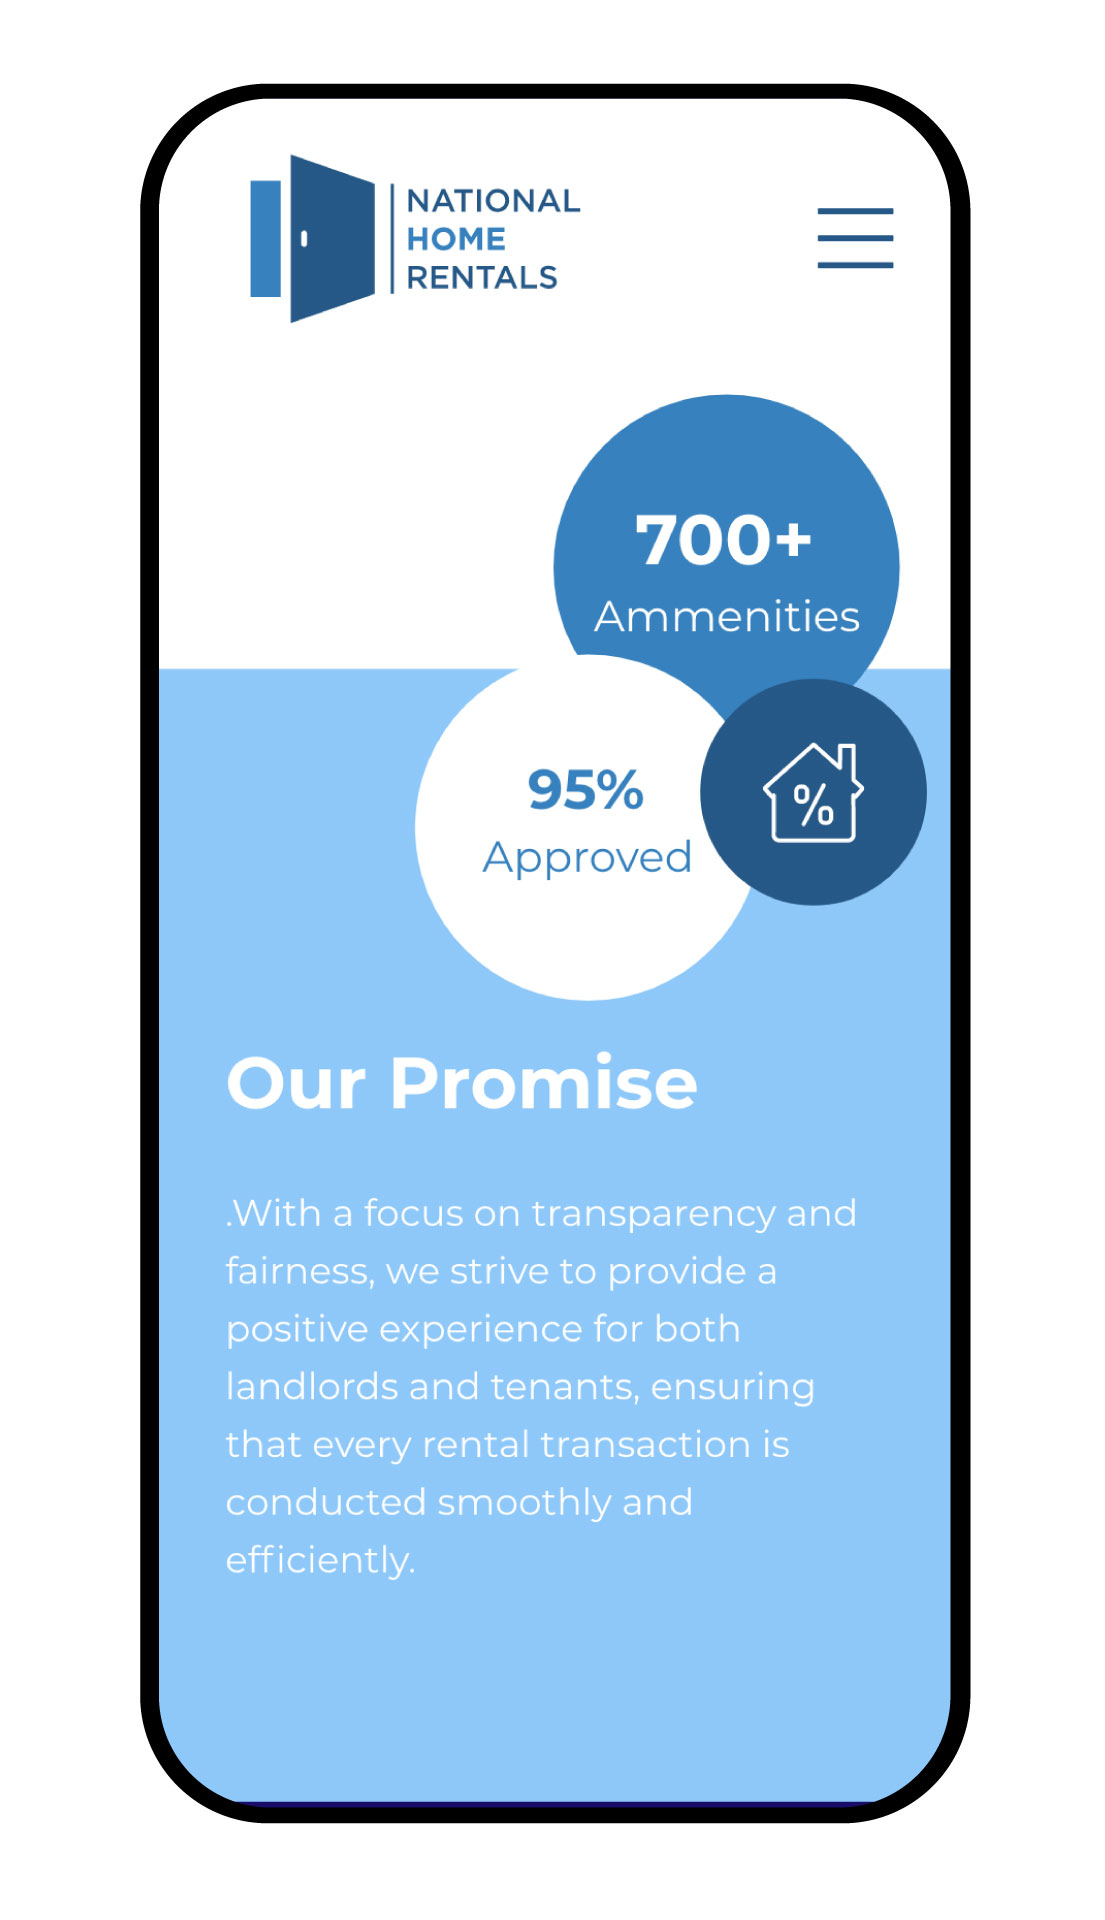 "Our Promise" section of the UI featuring service statistics in small and large circles.